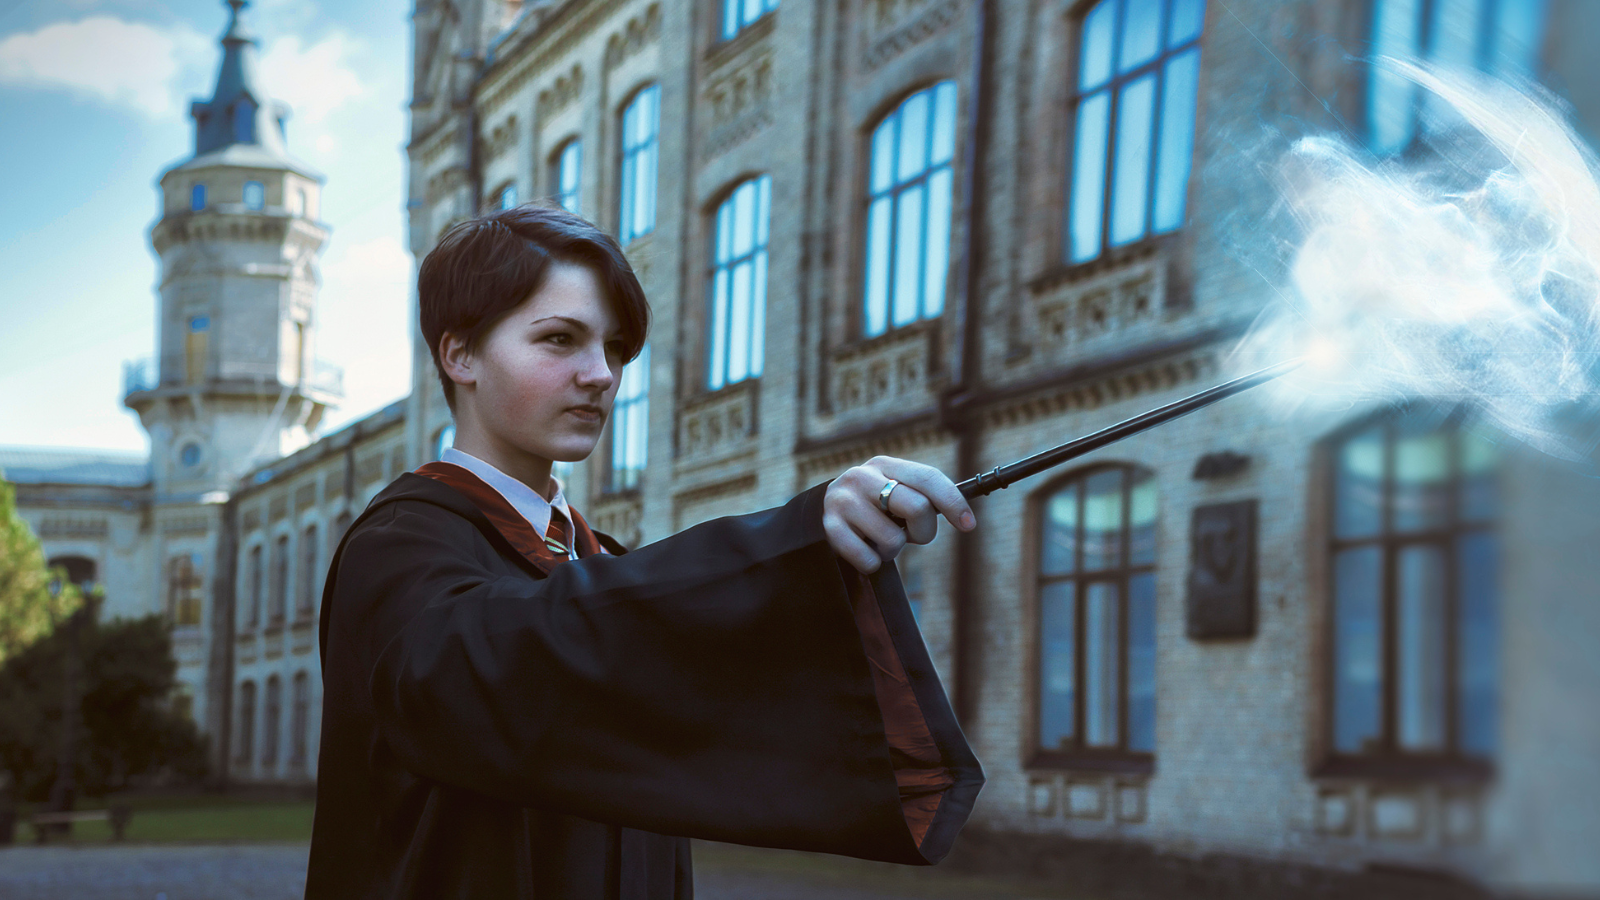 young person dressed up like Harry Potter